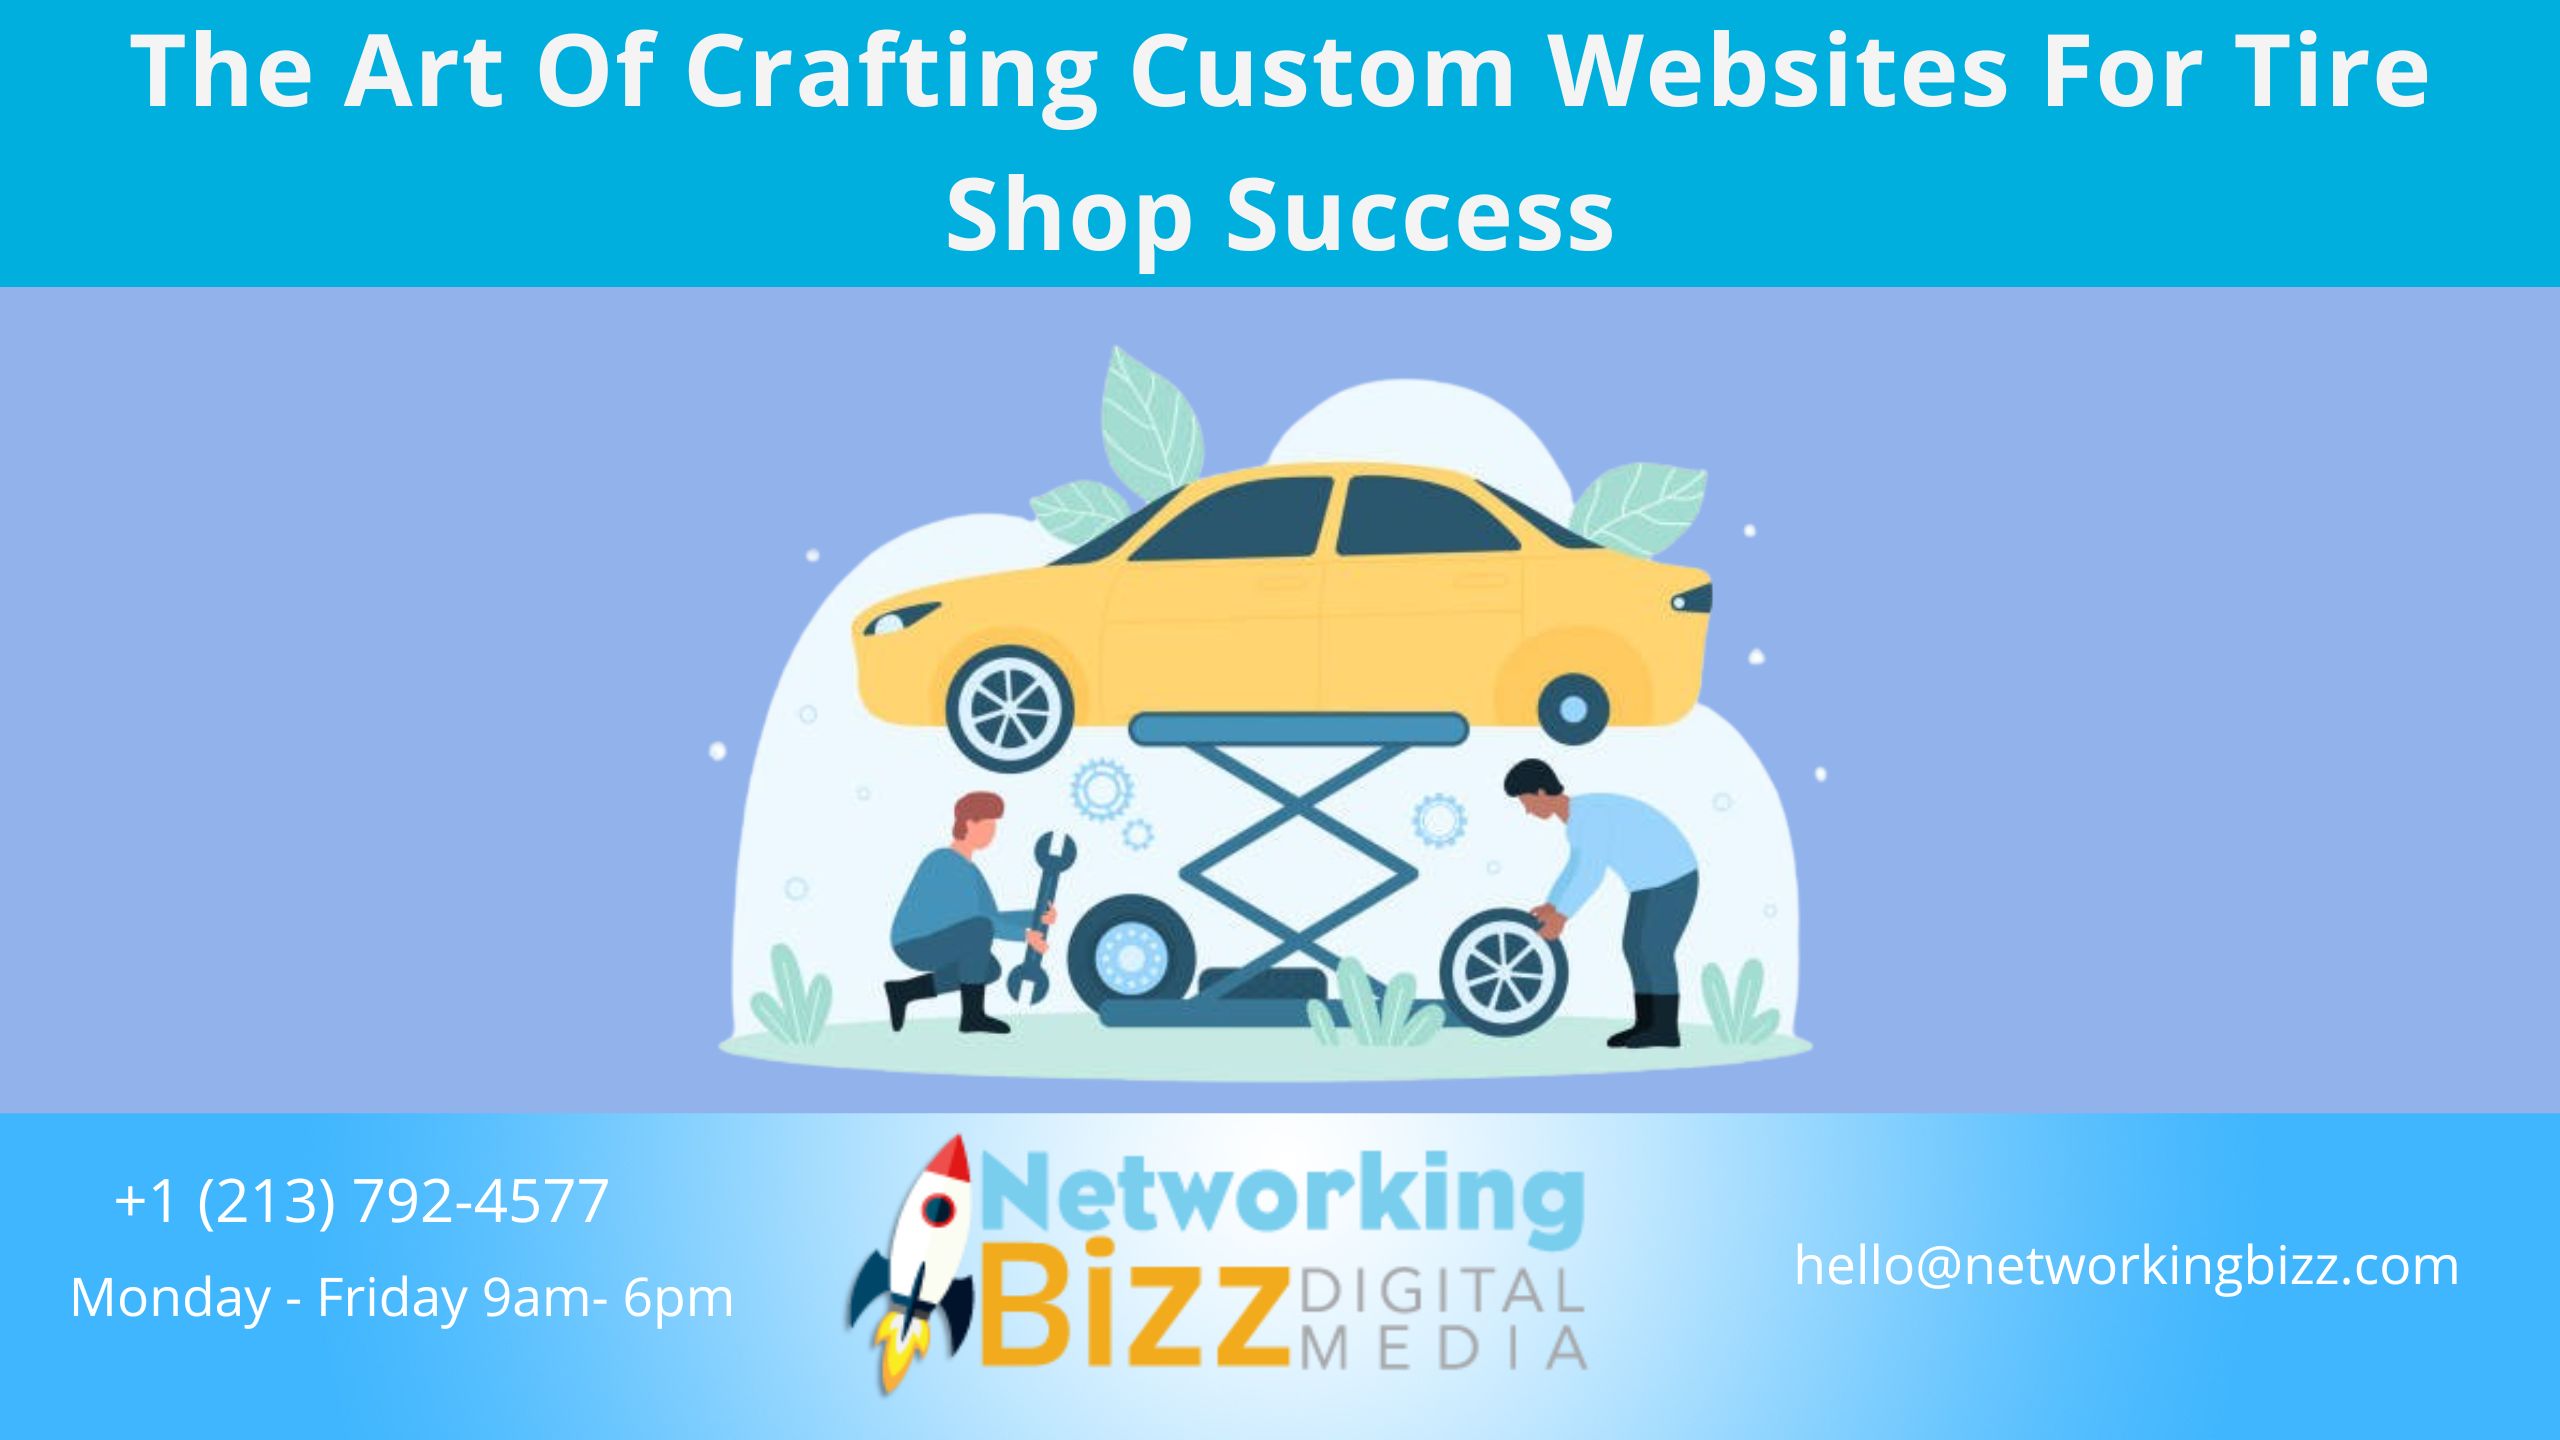 The Art Of Crafting Custom Websites For Tire Shop Success